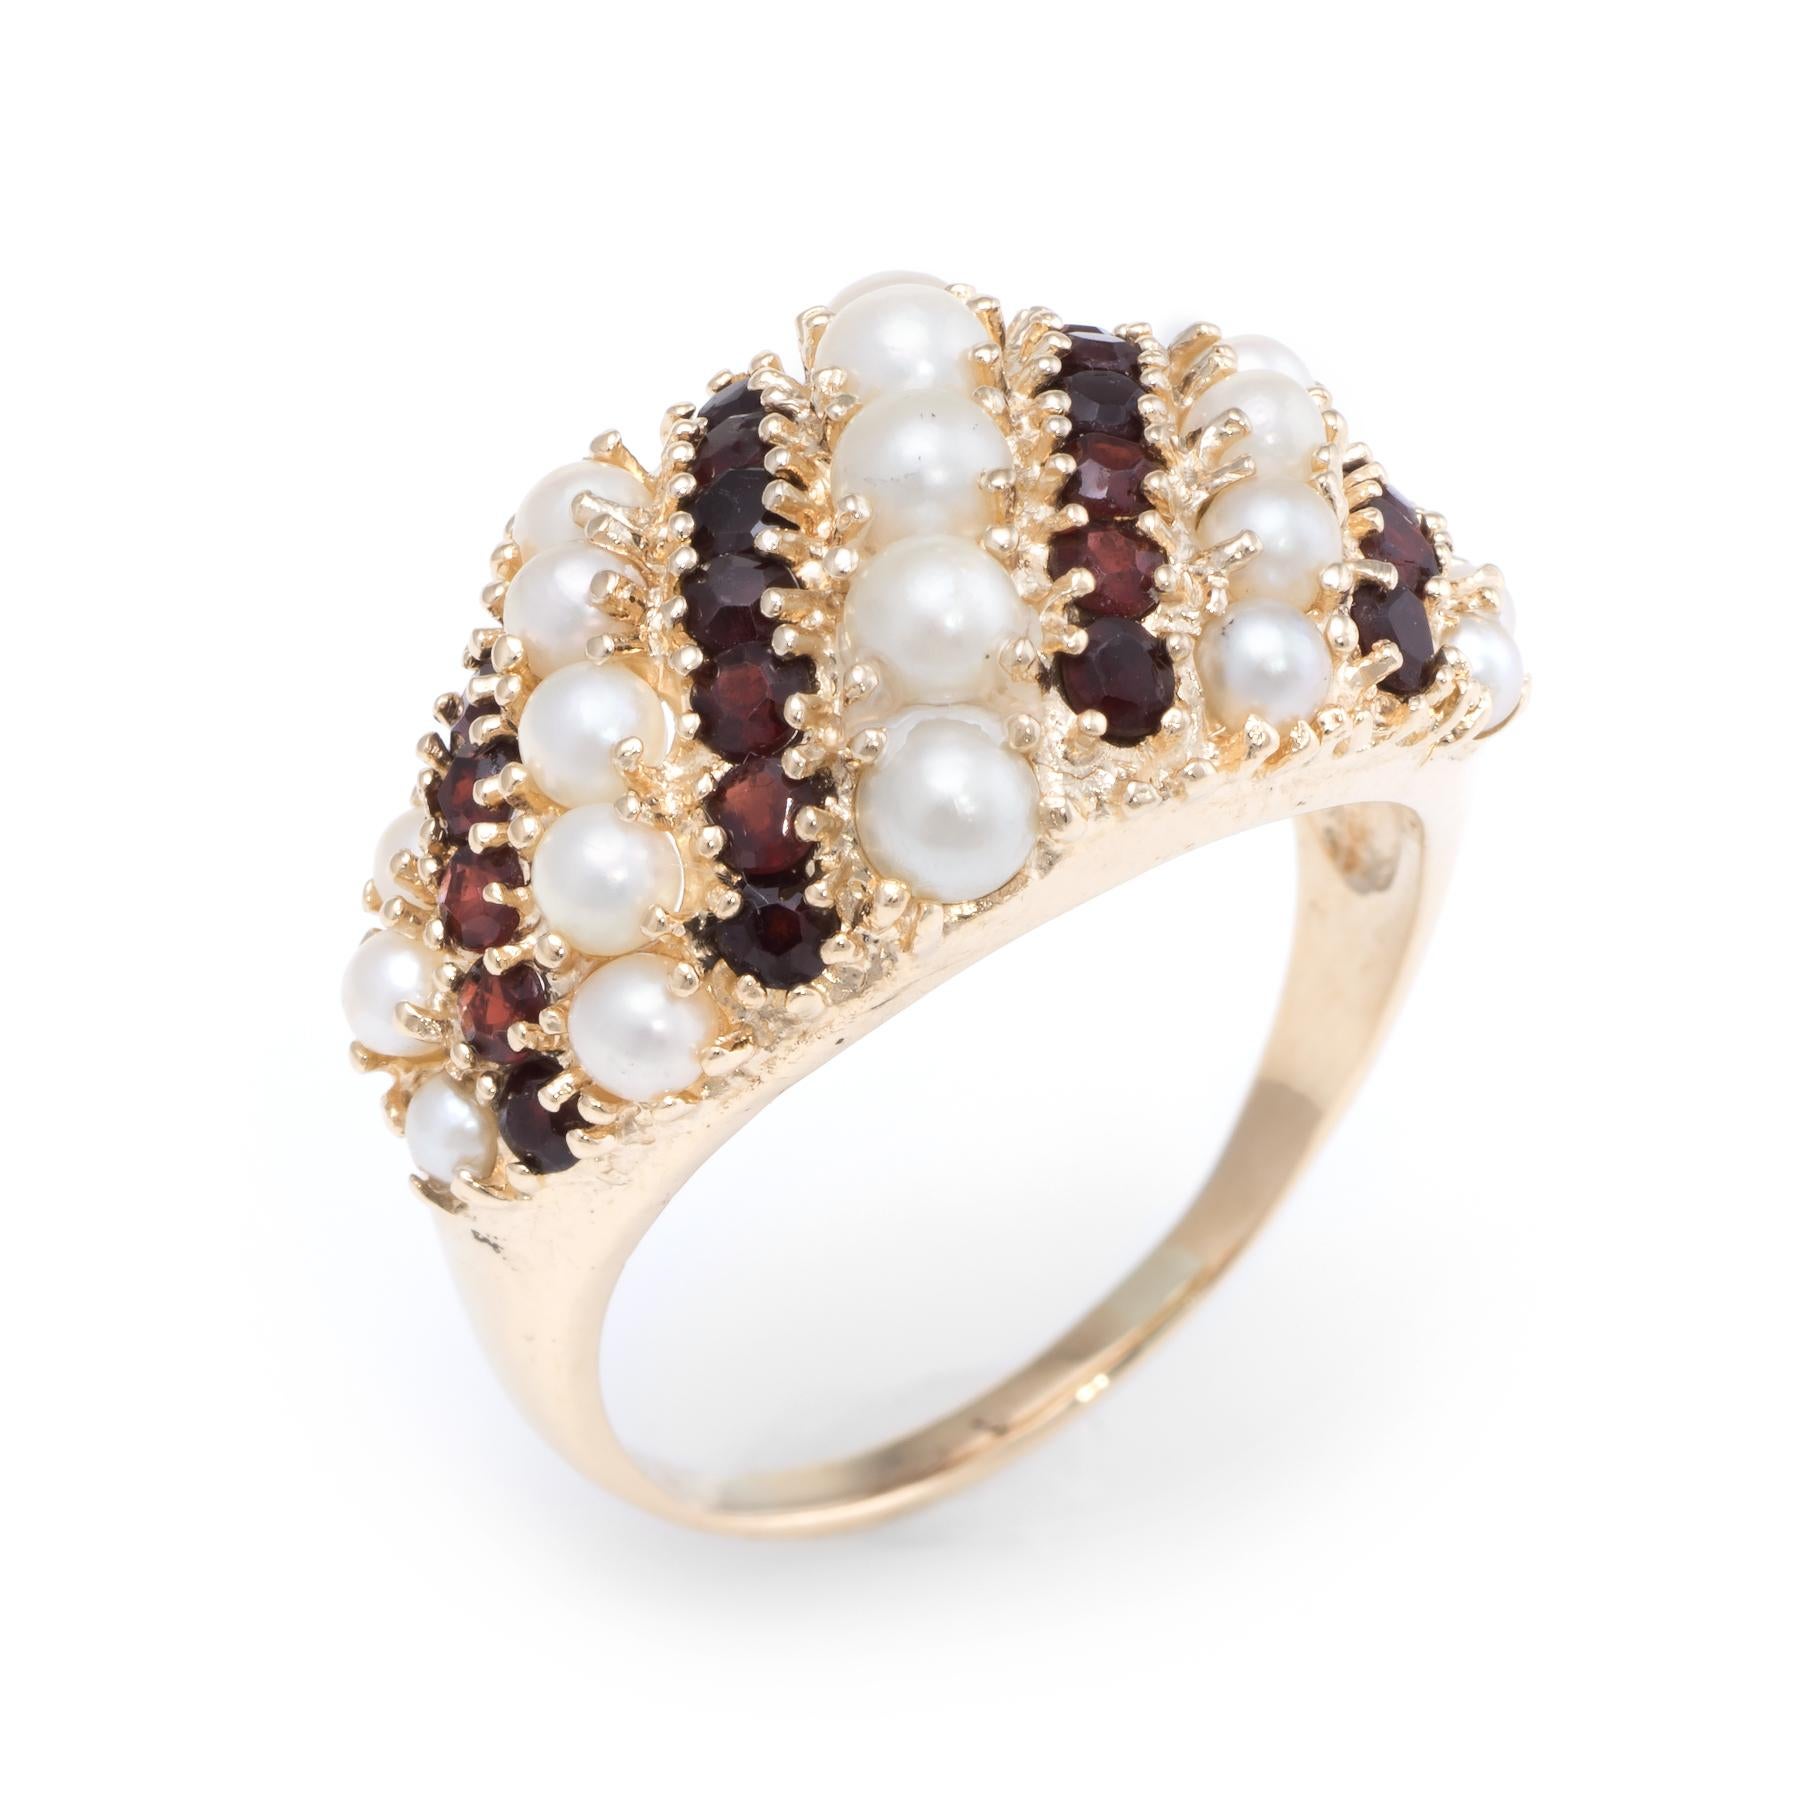 Finely detailed domed band, crafted in 14 karat yellow gold. 

Garnets total an estimated 1.25 carats, accented with cultured pearls that graduate in size from 3-4mm. The stones are in excellent condition and free of cracks or chips.   

The medium